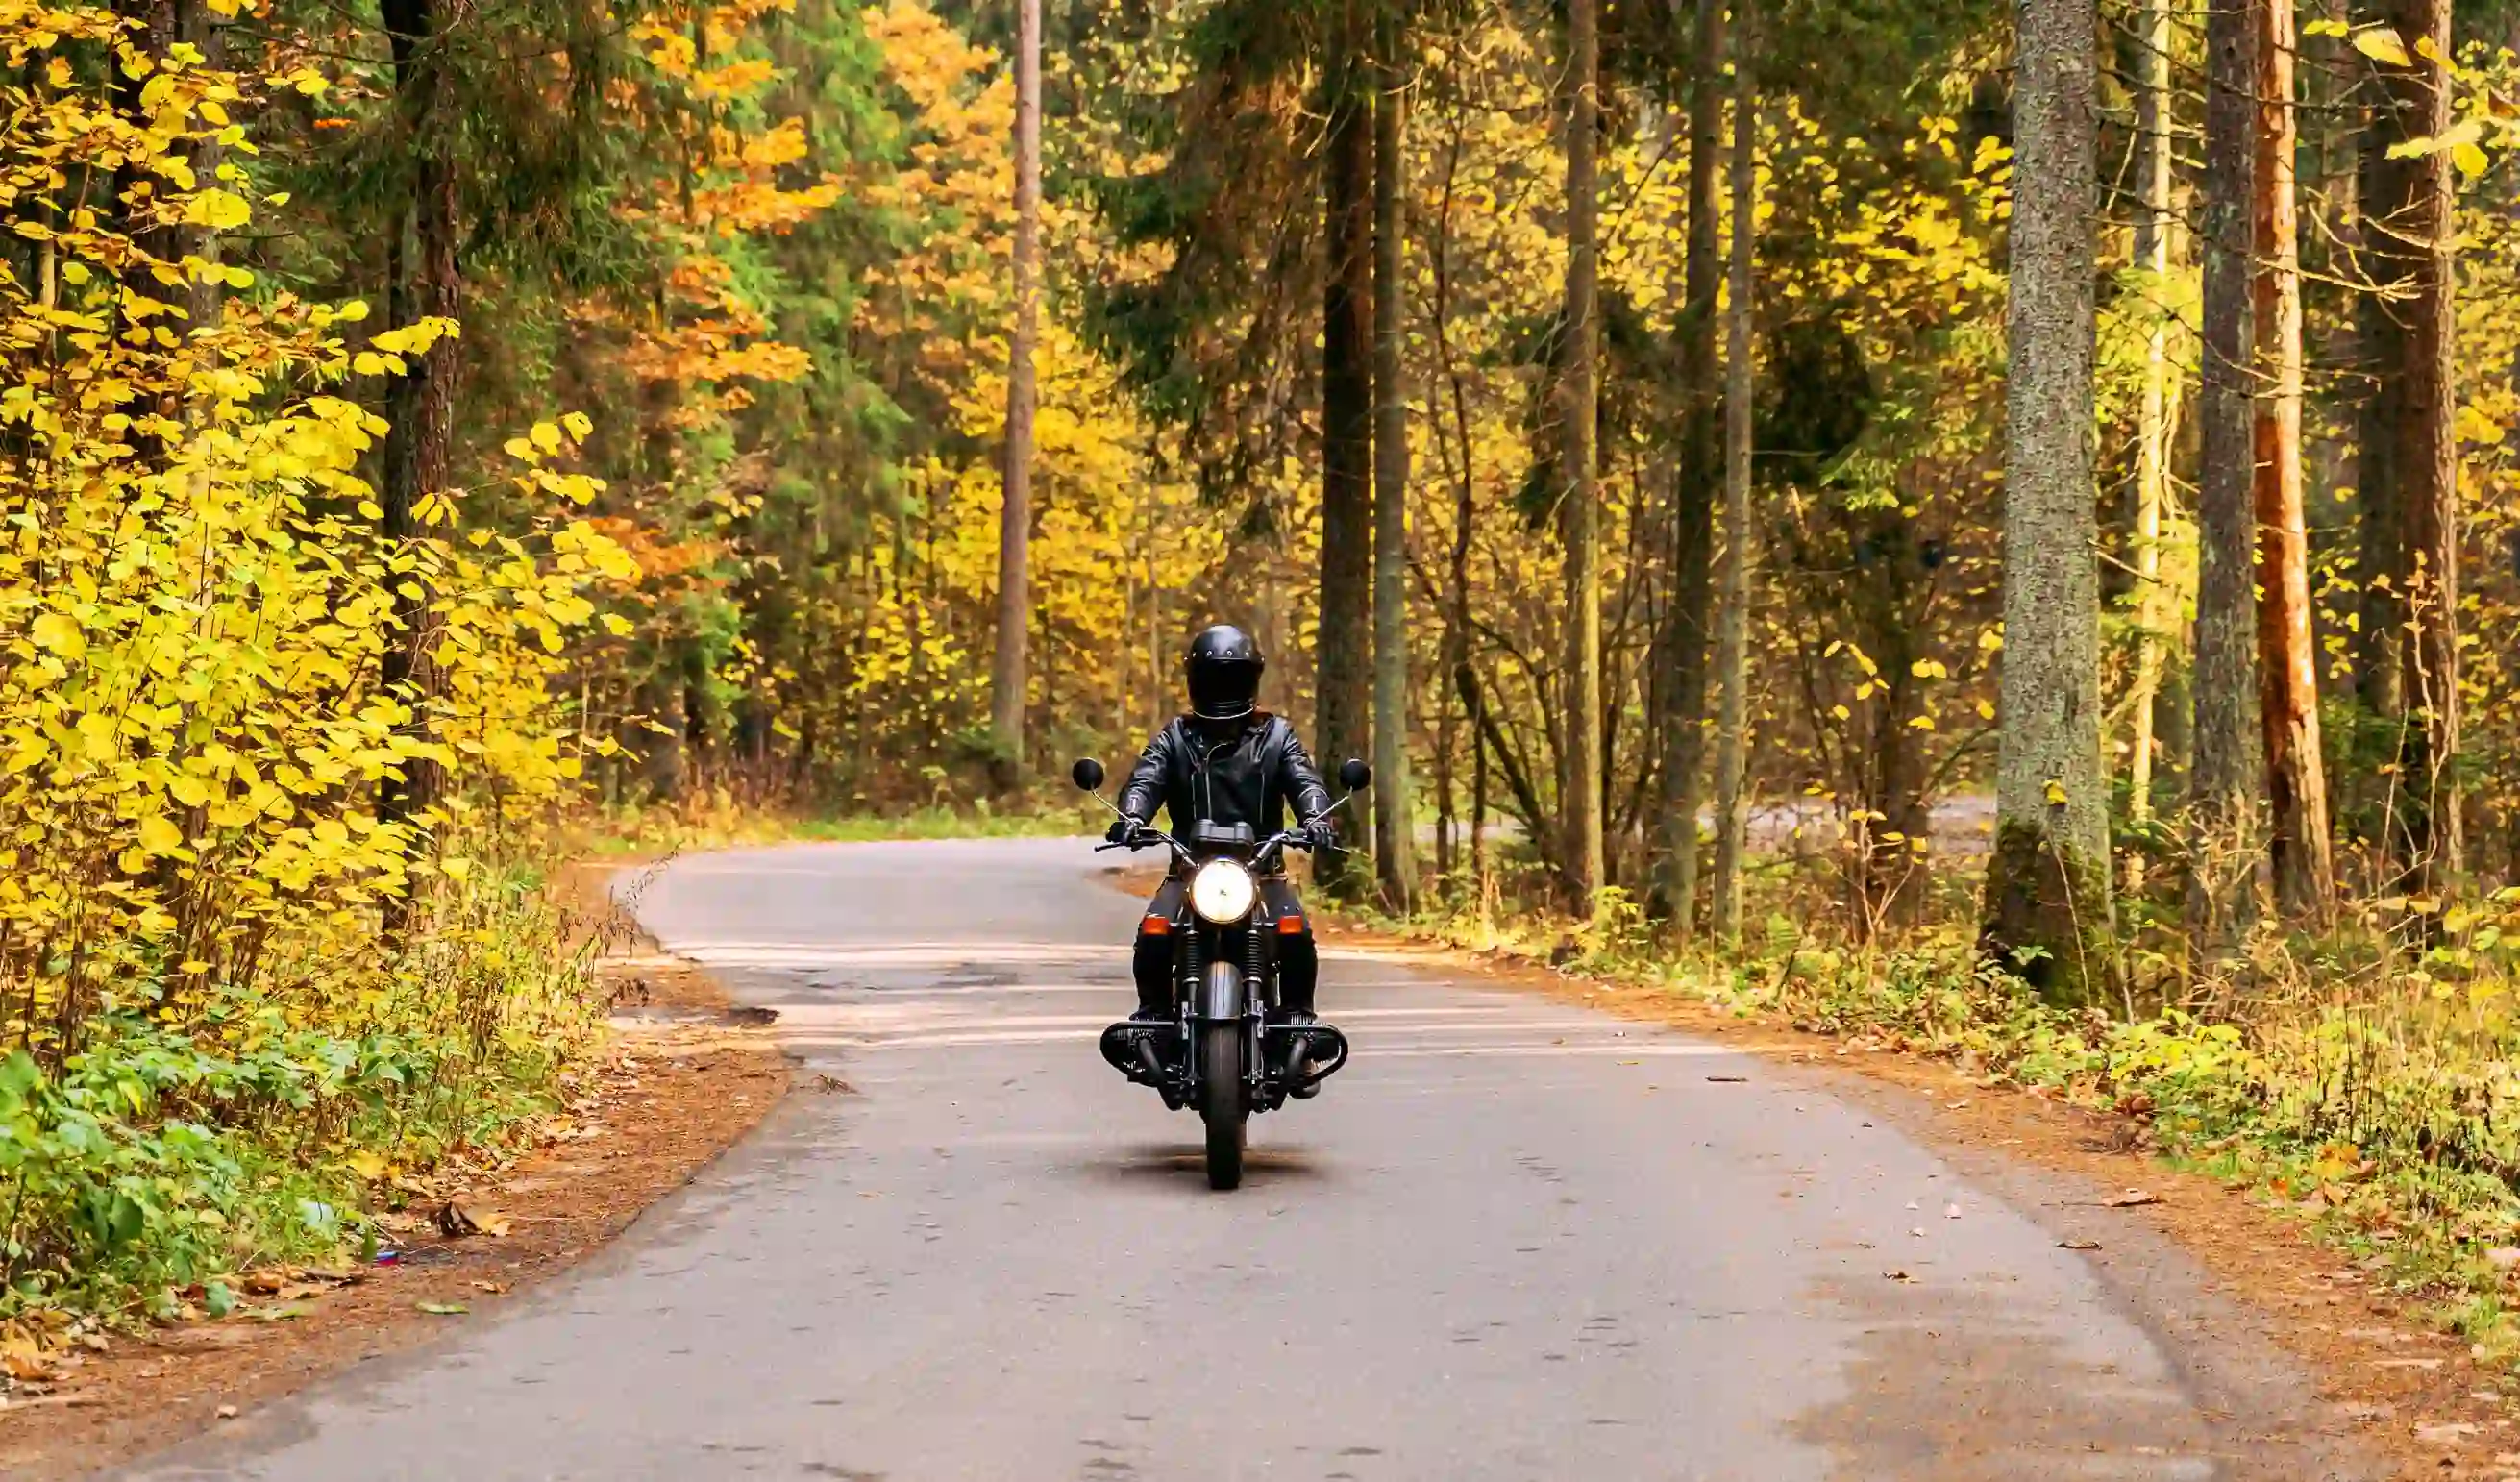 South India Royal Enfield Bike Tour for 12 Days from Bangalore